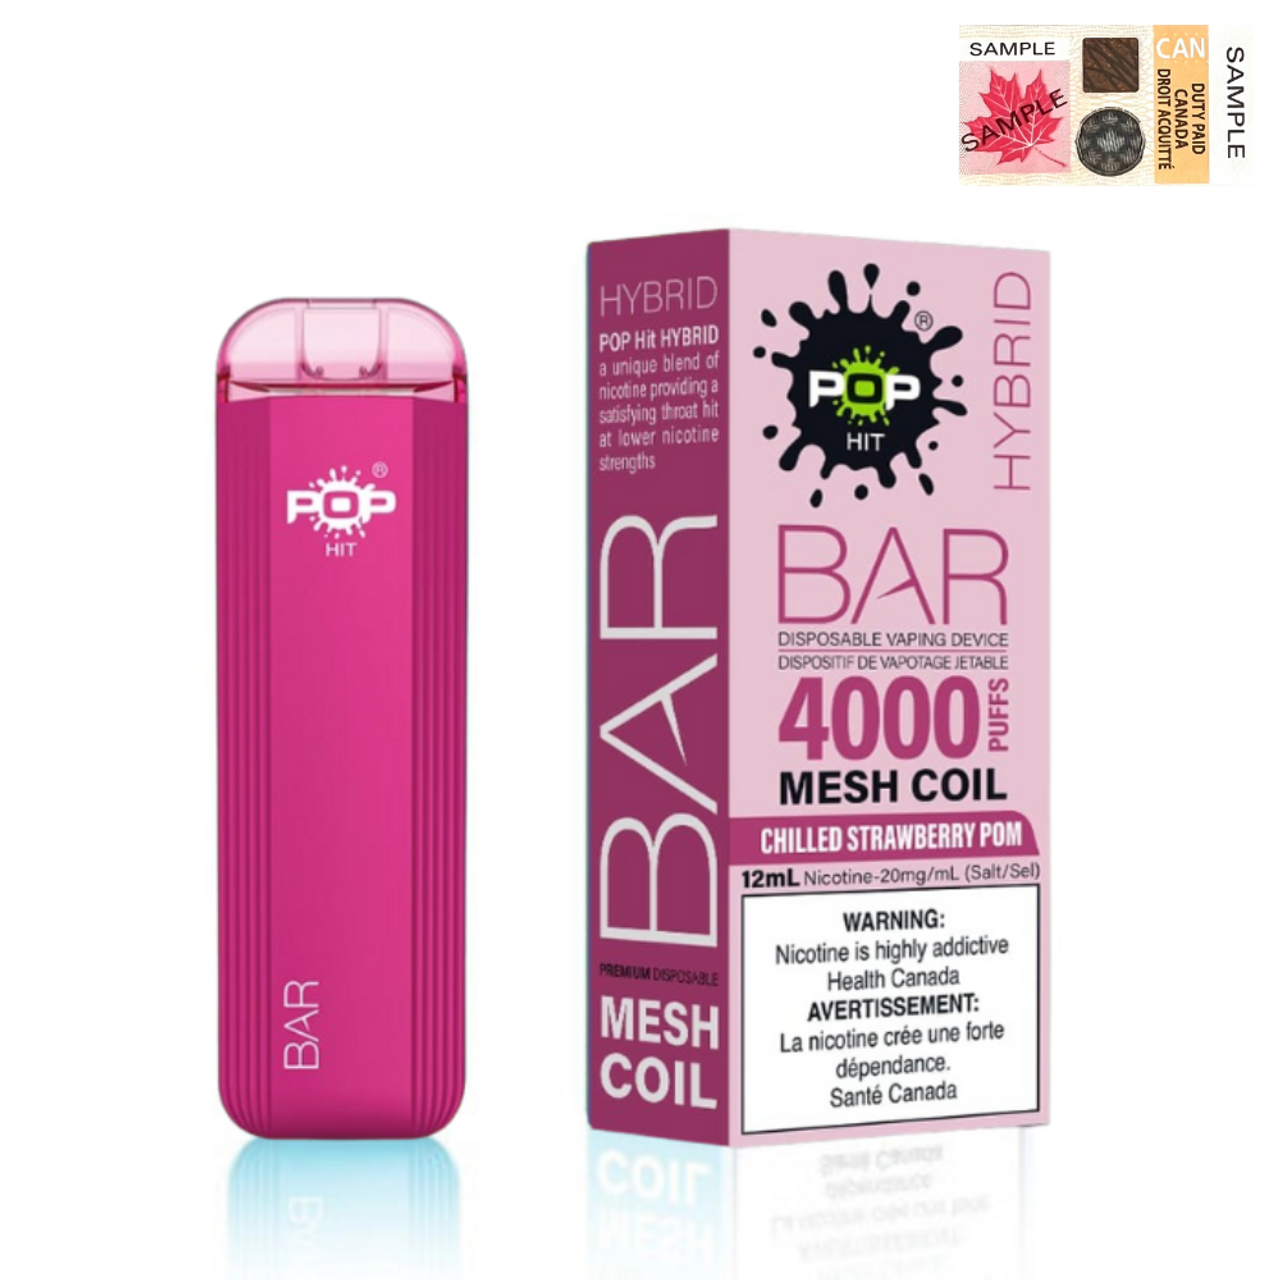 (Stamped) Chilled Strawberry Pom Pop Hybrid Bar 4000 Puff Disposable Vape Ct 5